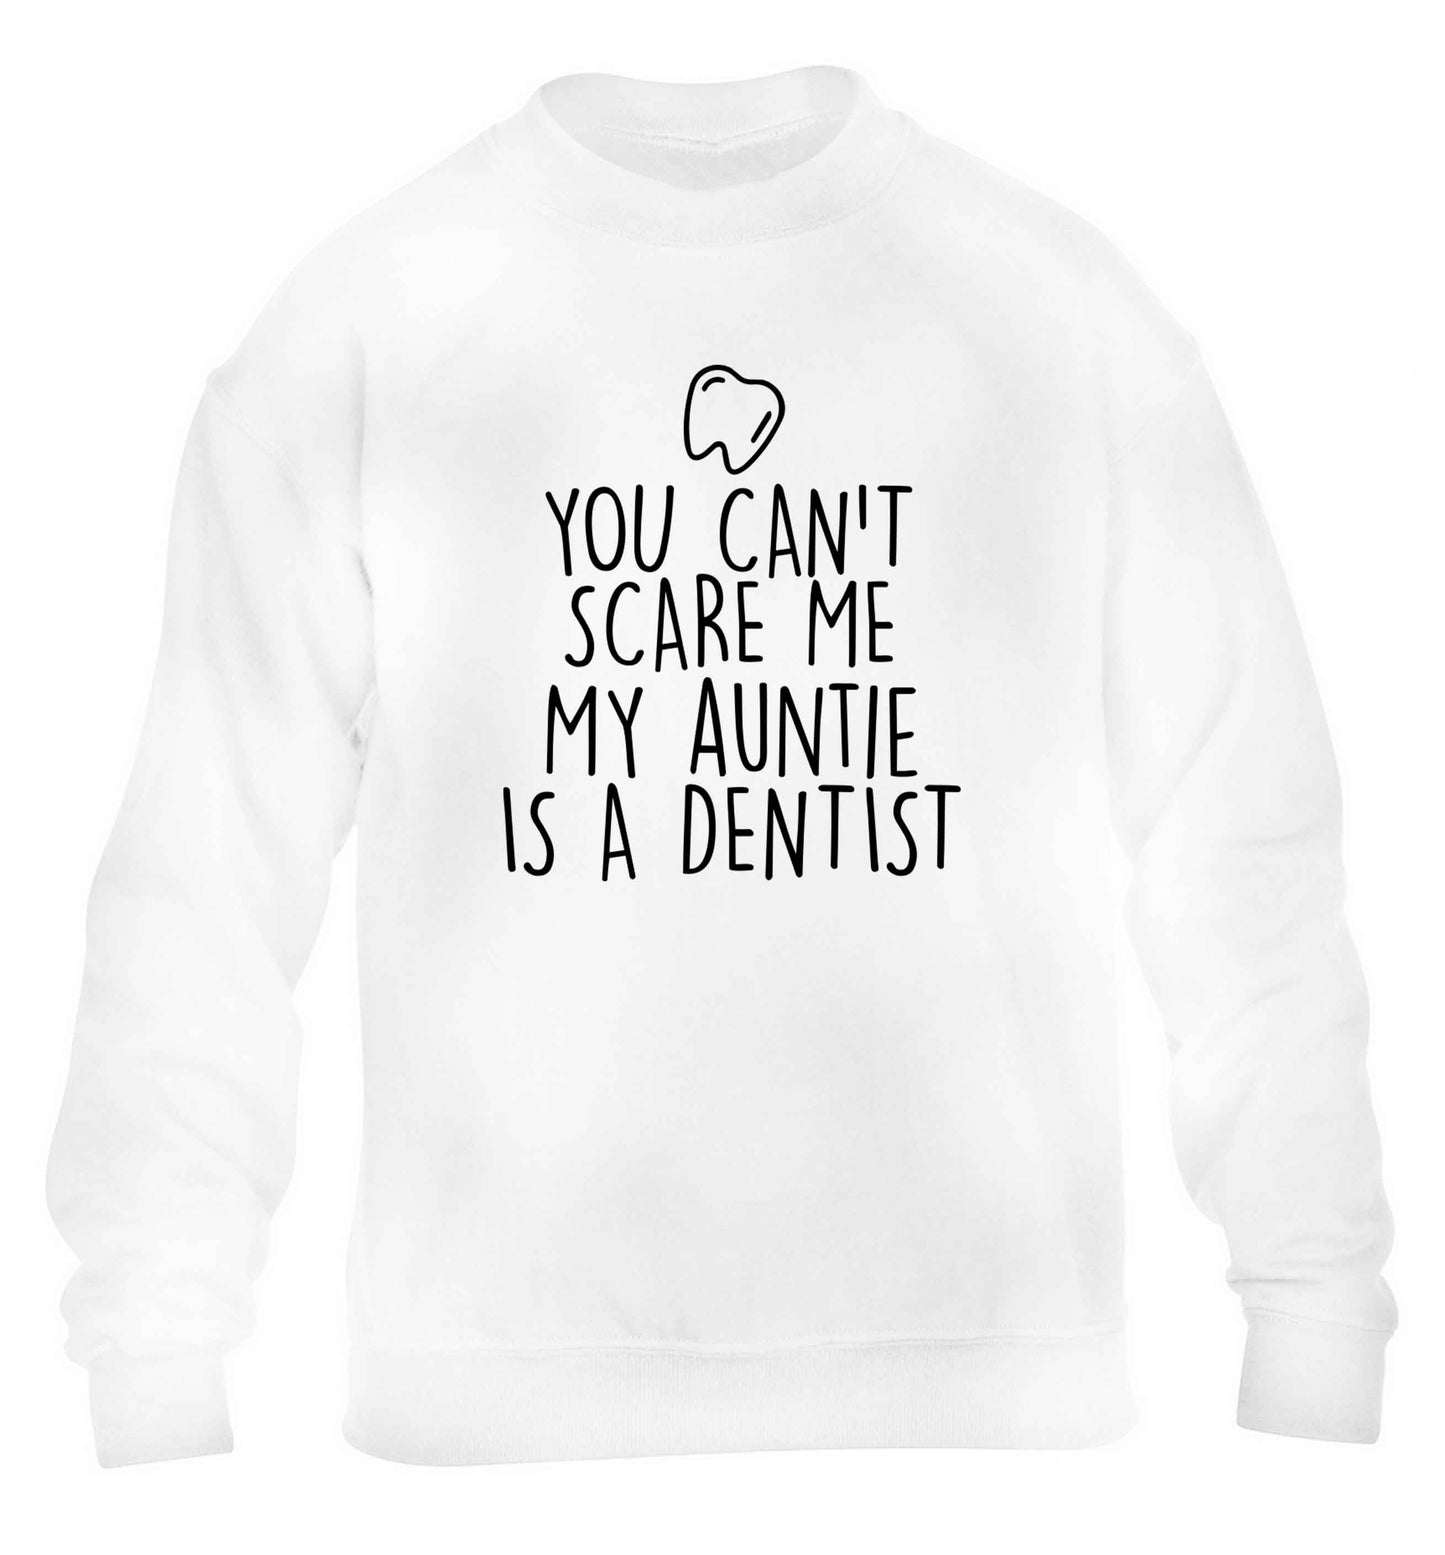 You can't scare me my auntie is a dentist children's white sweater 12-13 Years